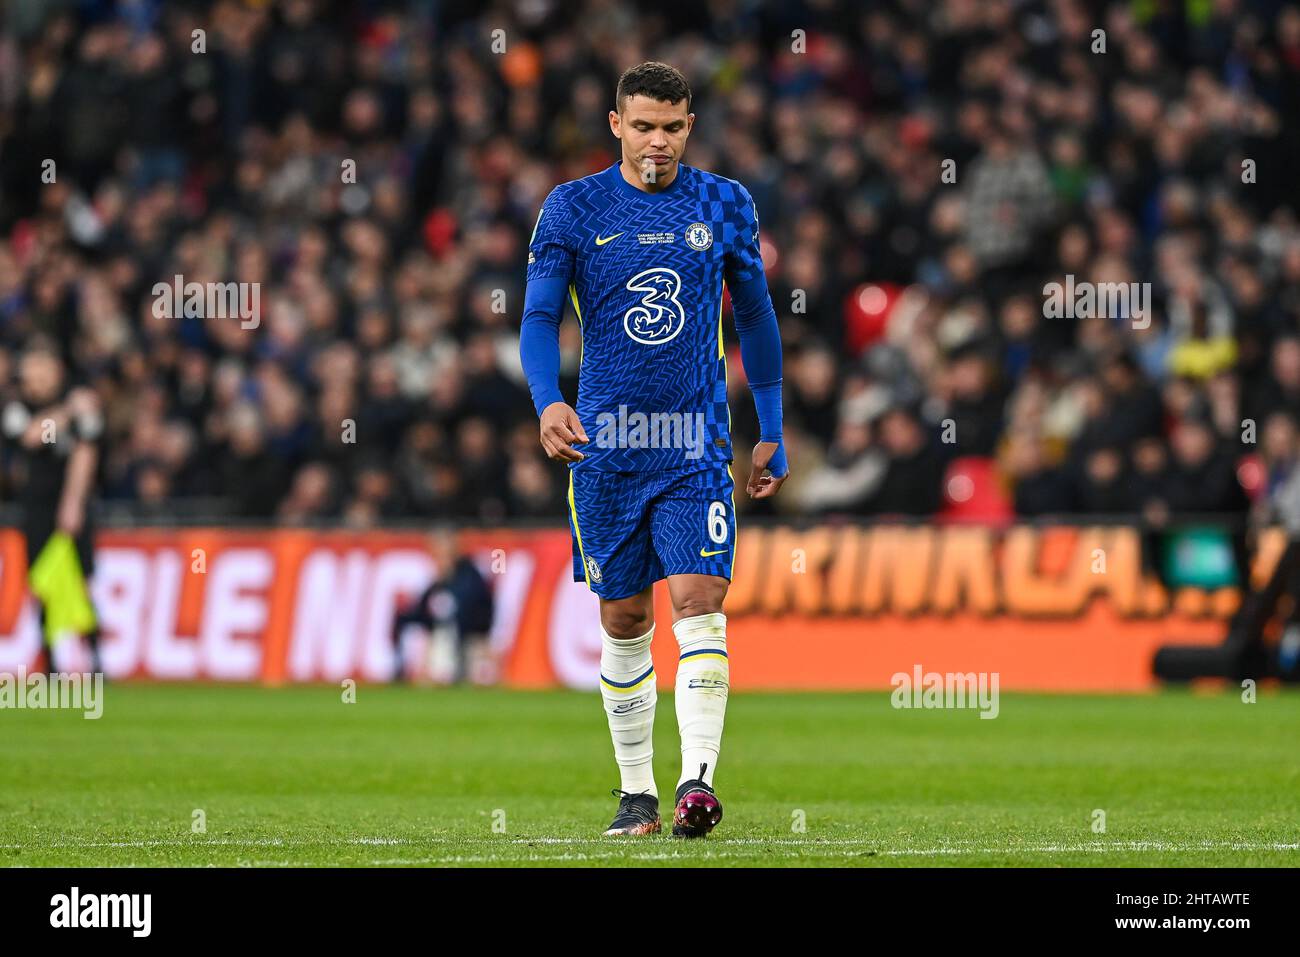 Thiago Silva #6 of Chelsea during the game in, on 2/27/2022